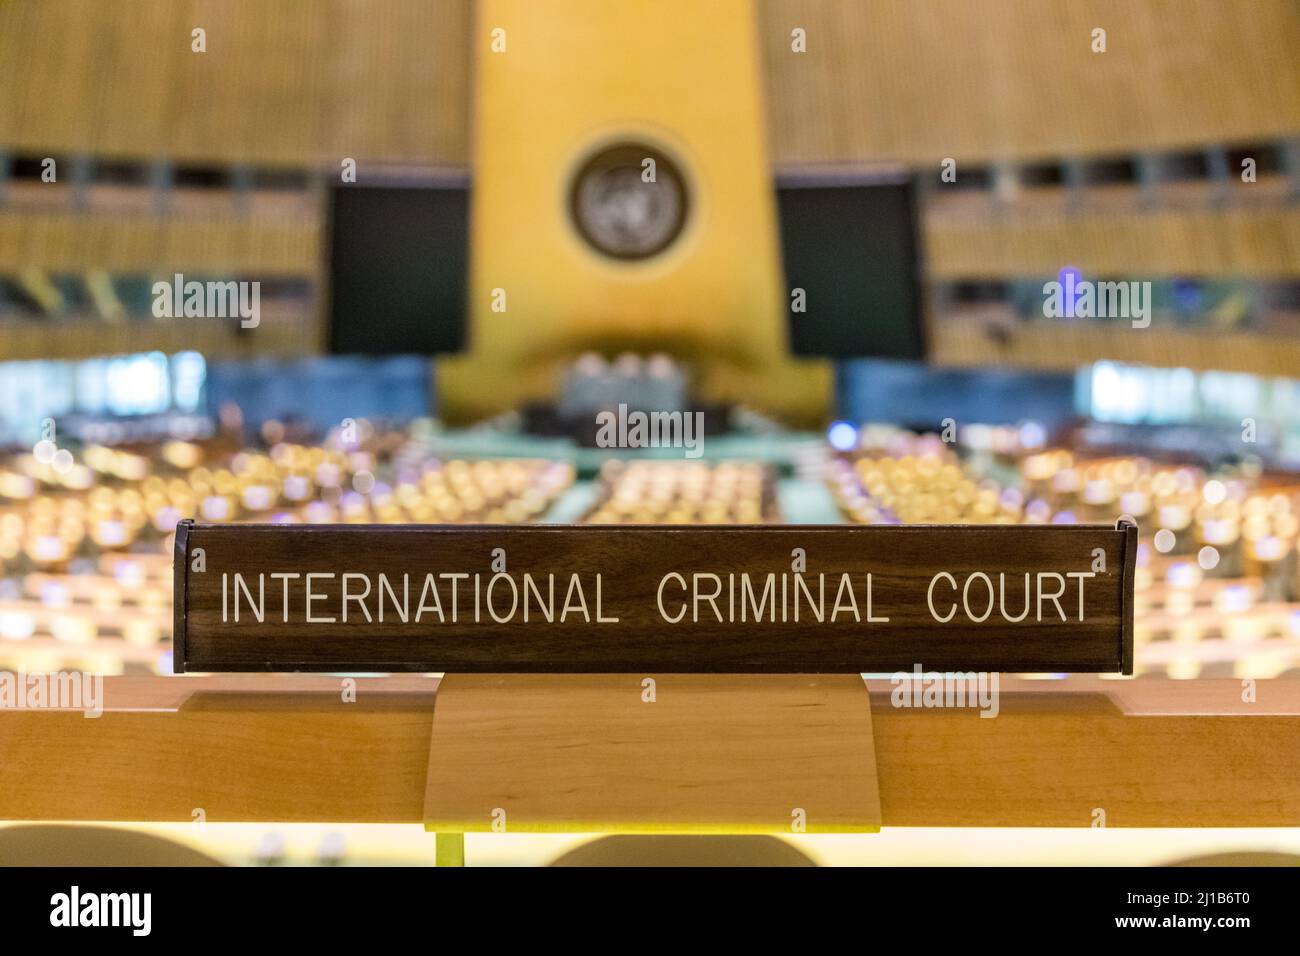 INTERNATIONAL CRIMINAL COURT IN THE GENERAL ASSEMBLY HALL OF THE UNITED NATIONS ORGANIZATION HEADQUARTERS IN NEW YORK, PEACE IN THE WORLD, UNO, MIDTOWN MANHATTAN, NEW YORK CITY, NEW YORK, USA Stock Photo